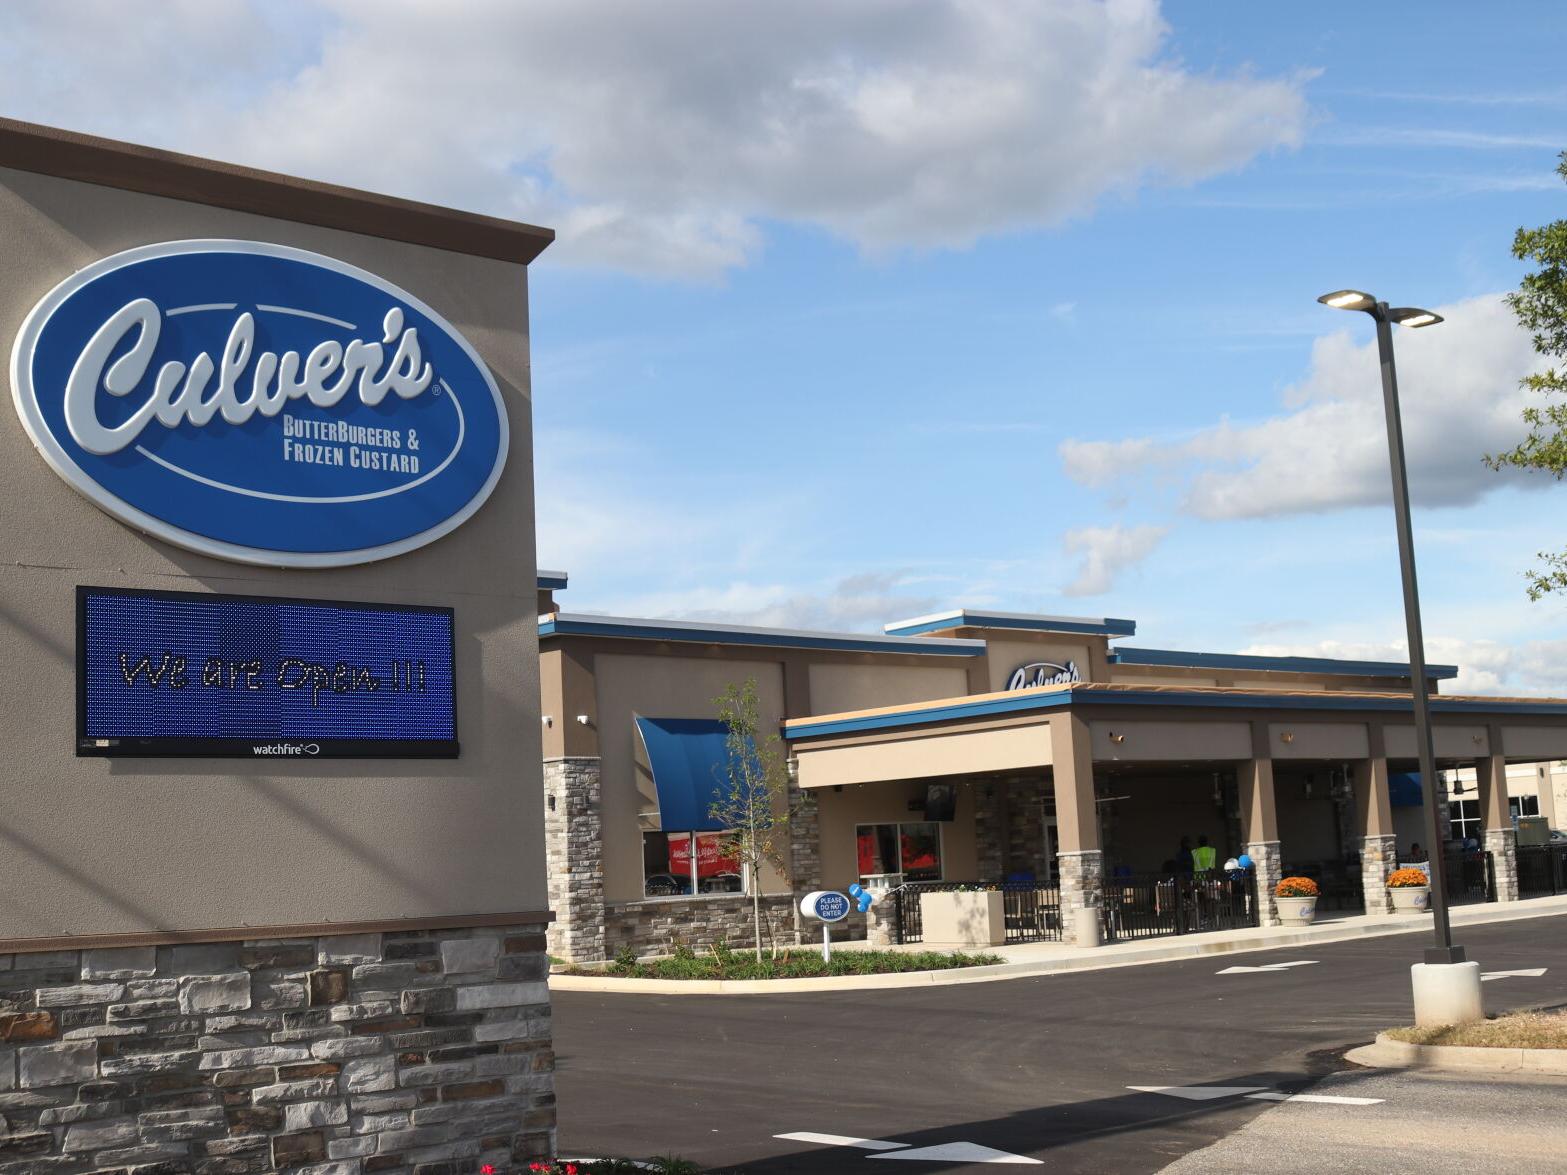 Culvers Opens Its Doors In Auburn - But What Was Its First Custard Flavor Of The Day Local Business News Oanowcom